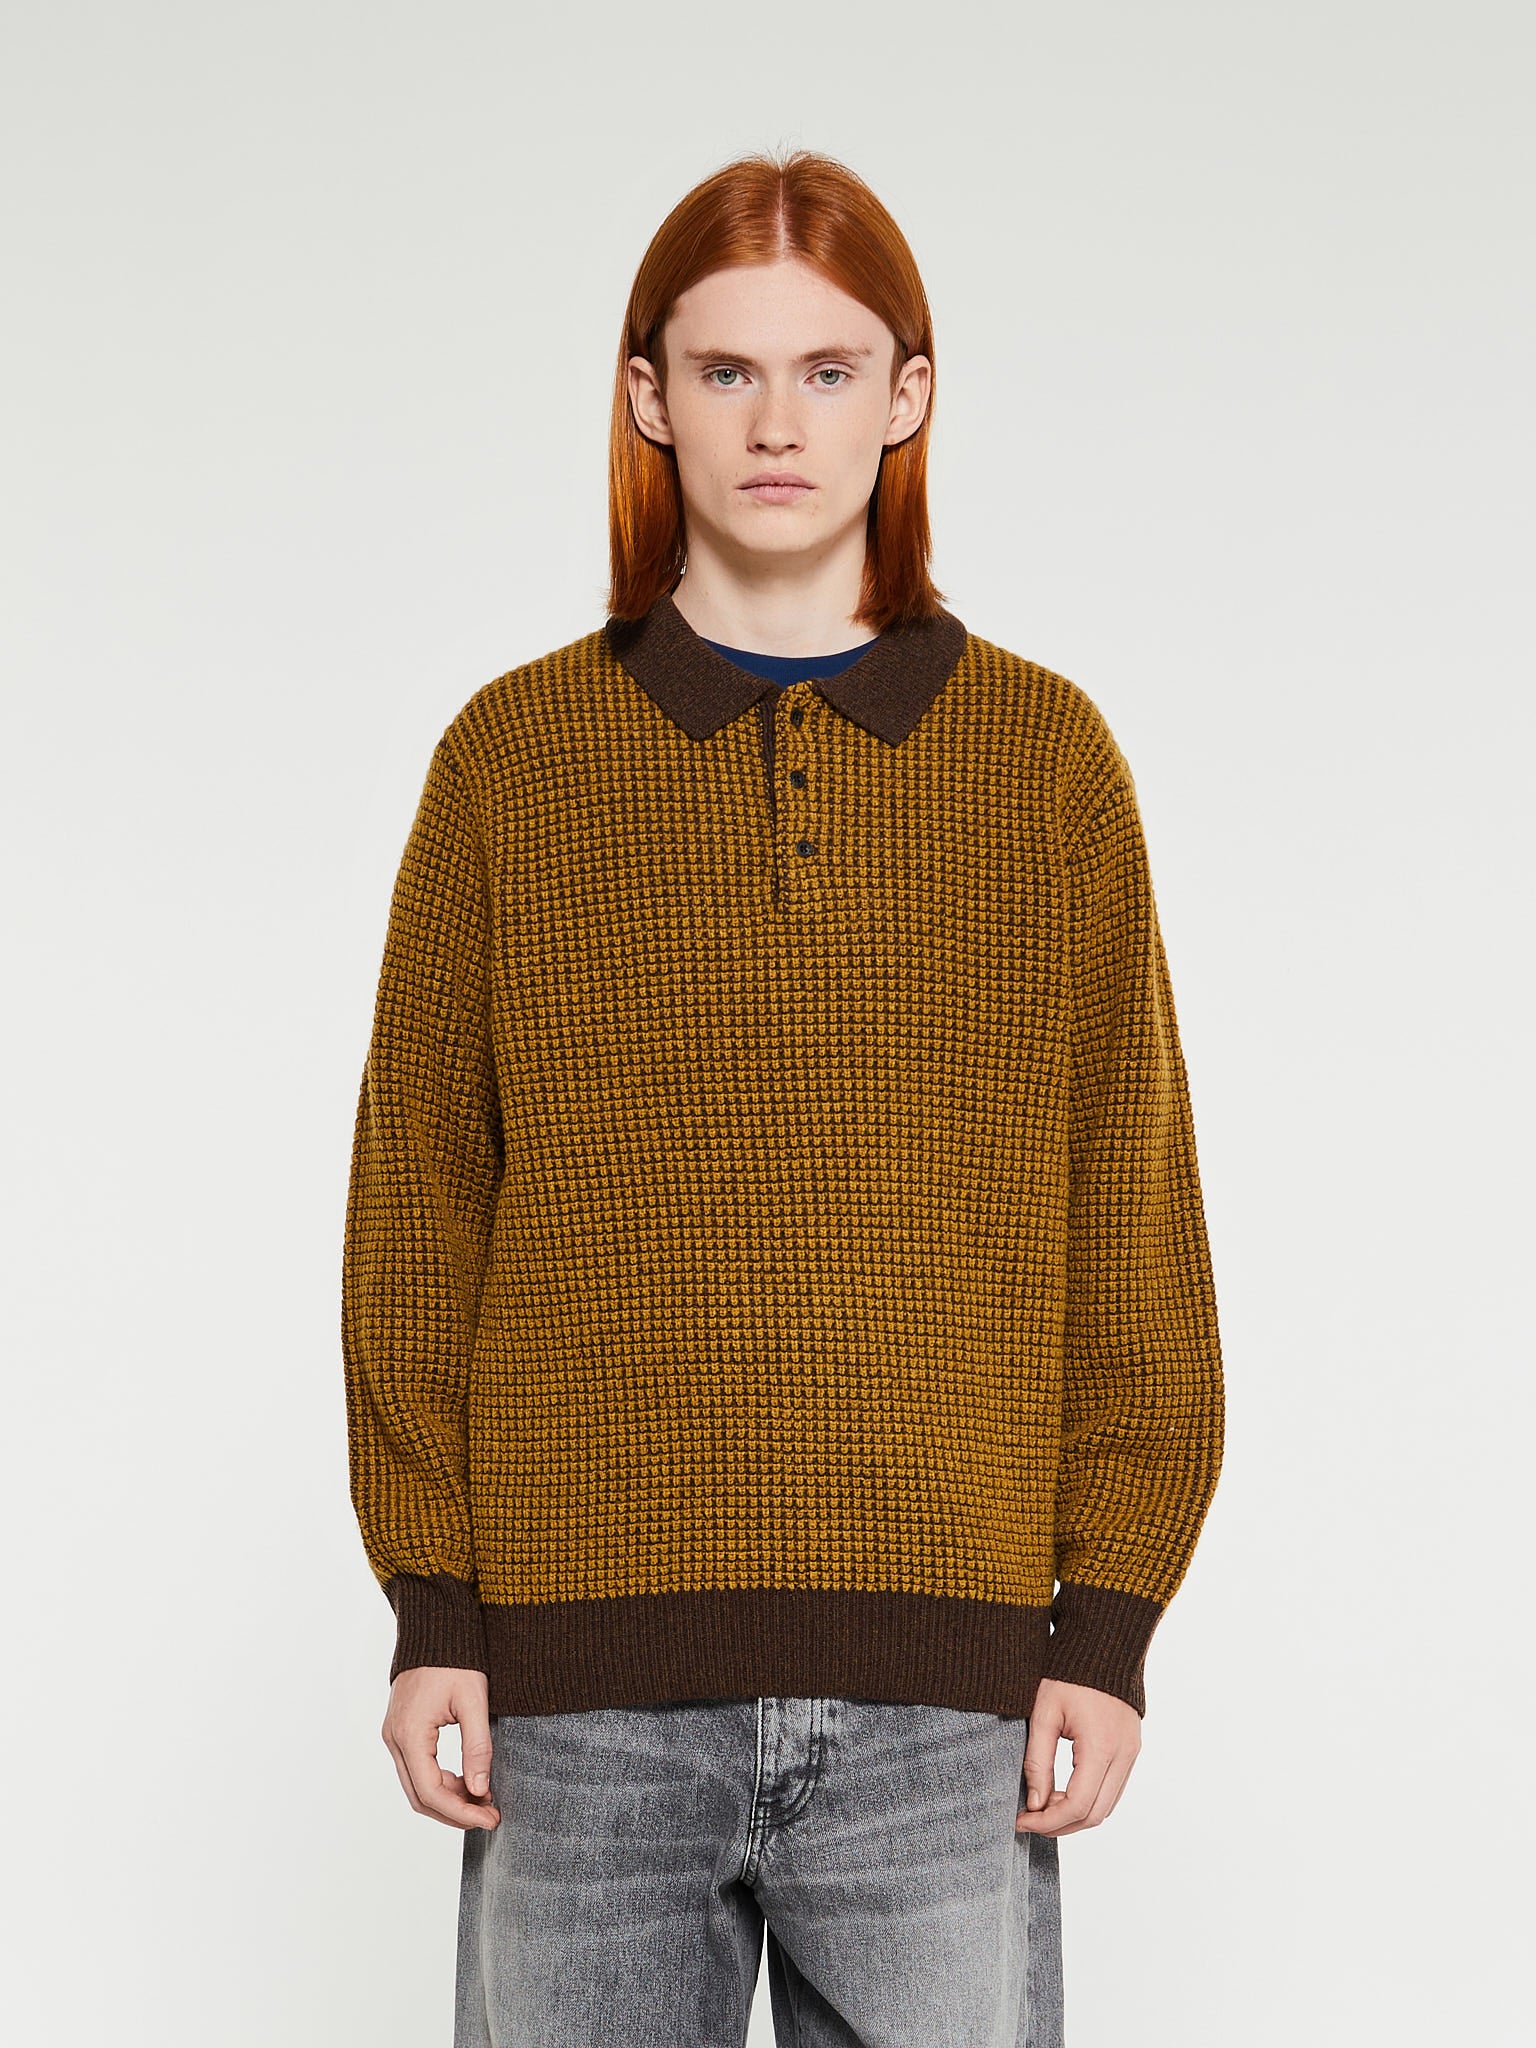 Beams Plus - Knit Polo Crochet-Like in Brown and Mustard